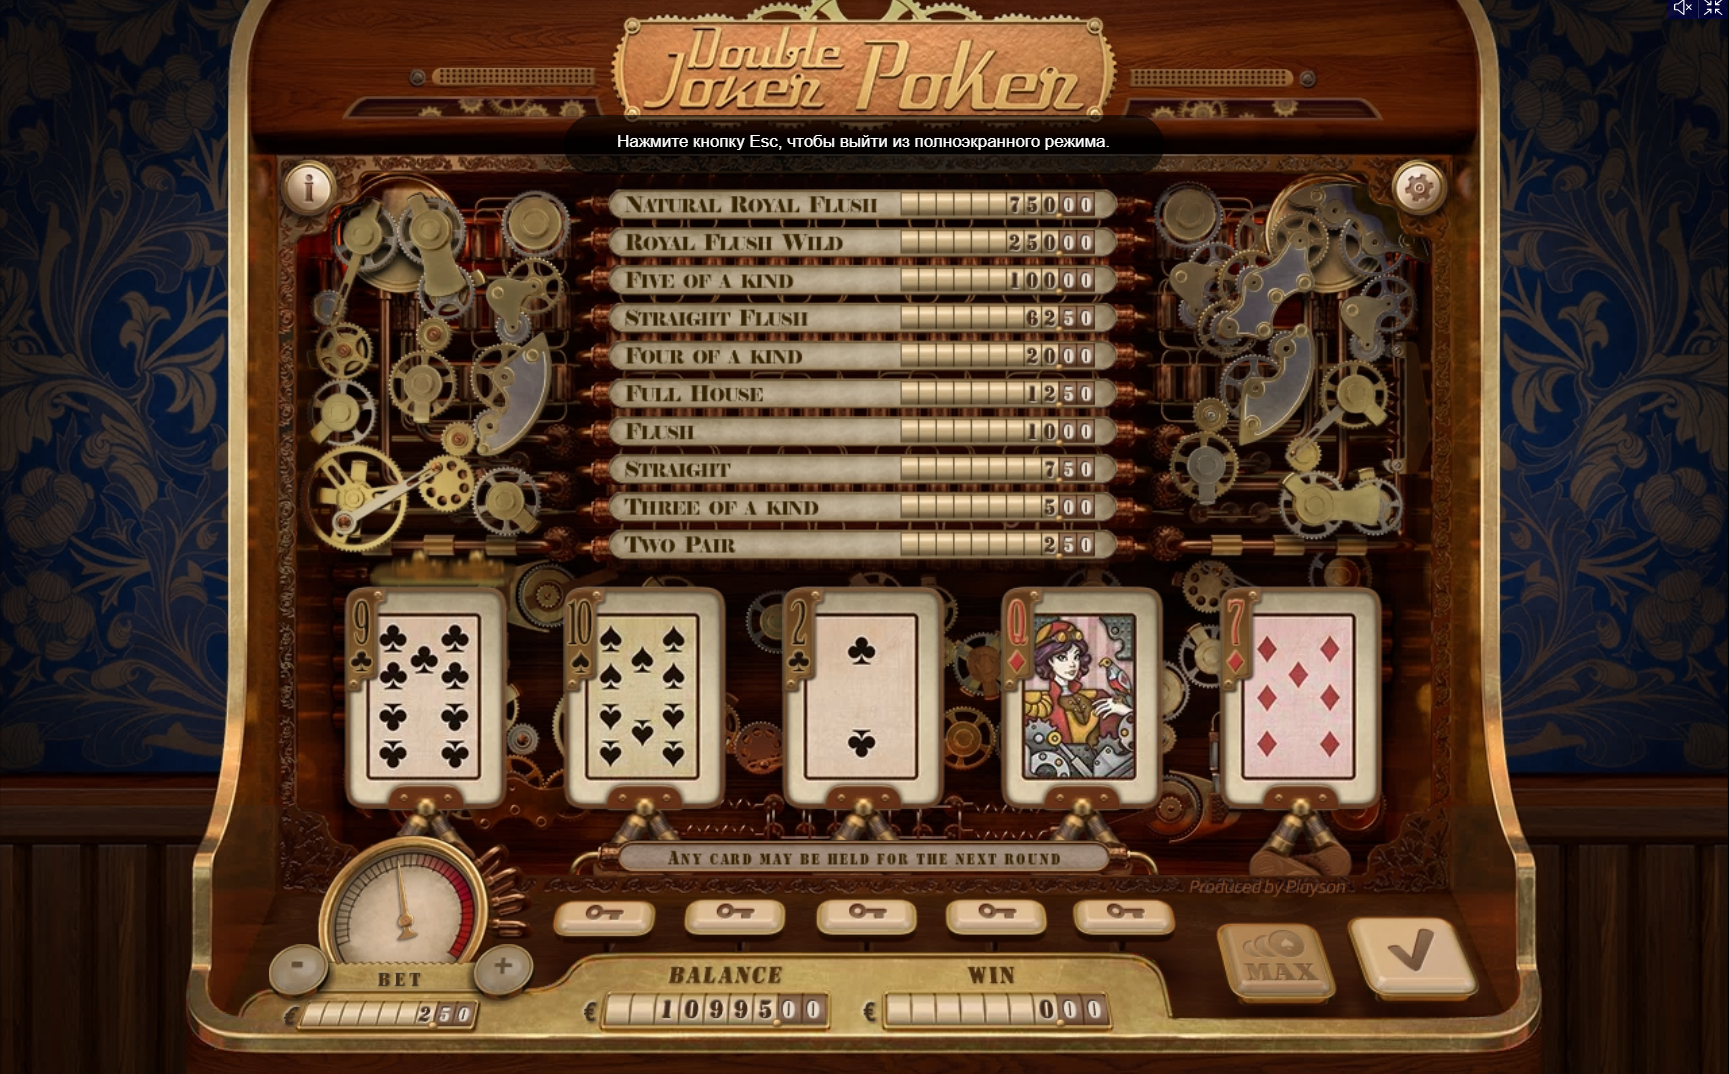 Double Joker Poker Game by Playson ?? Best UK Casinos to Play Online